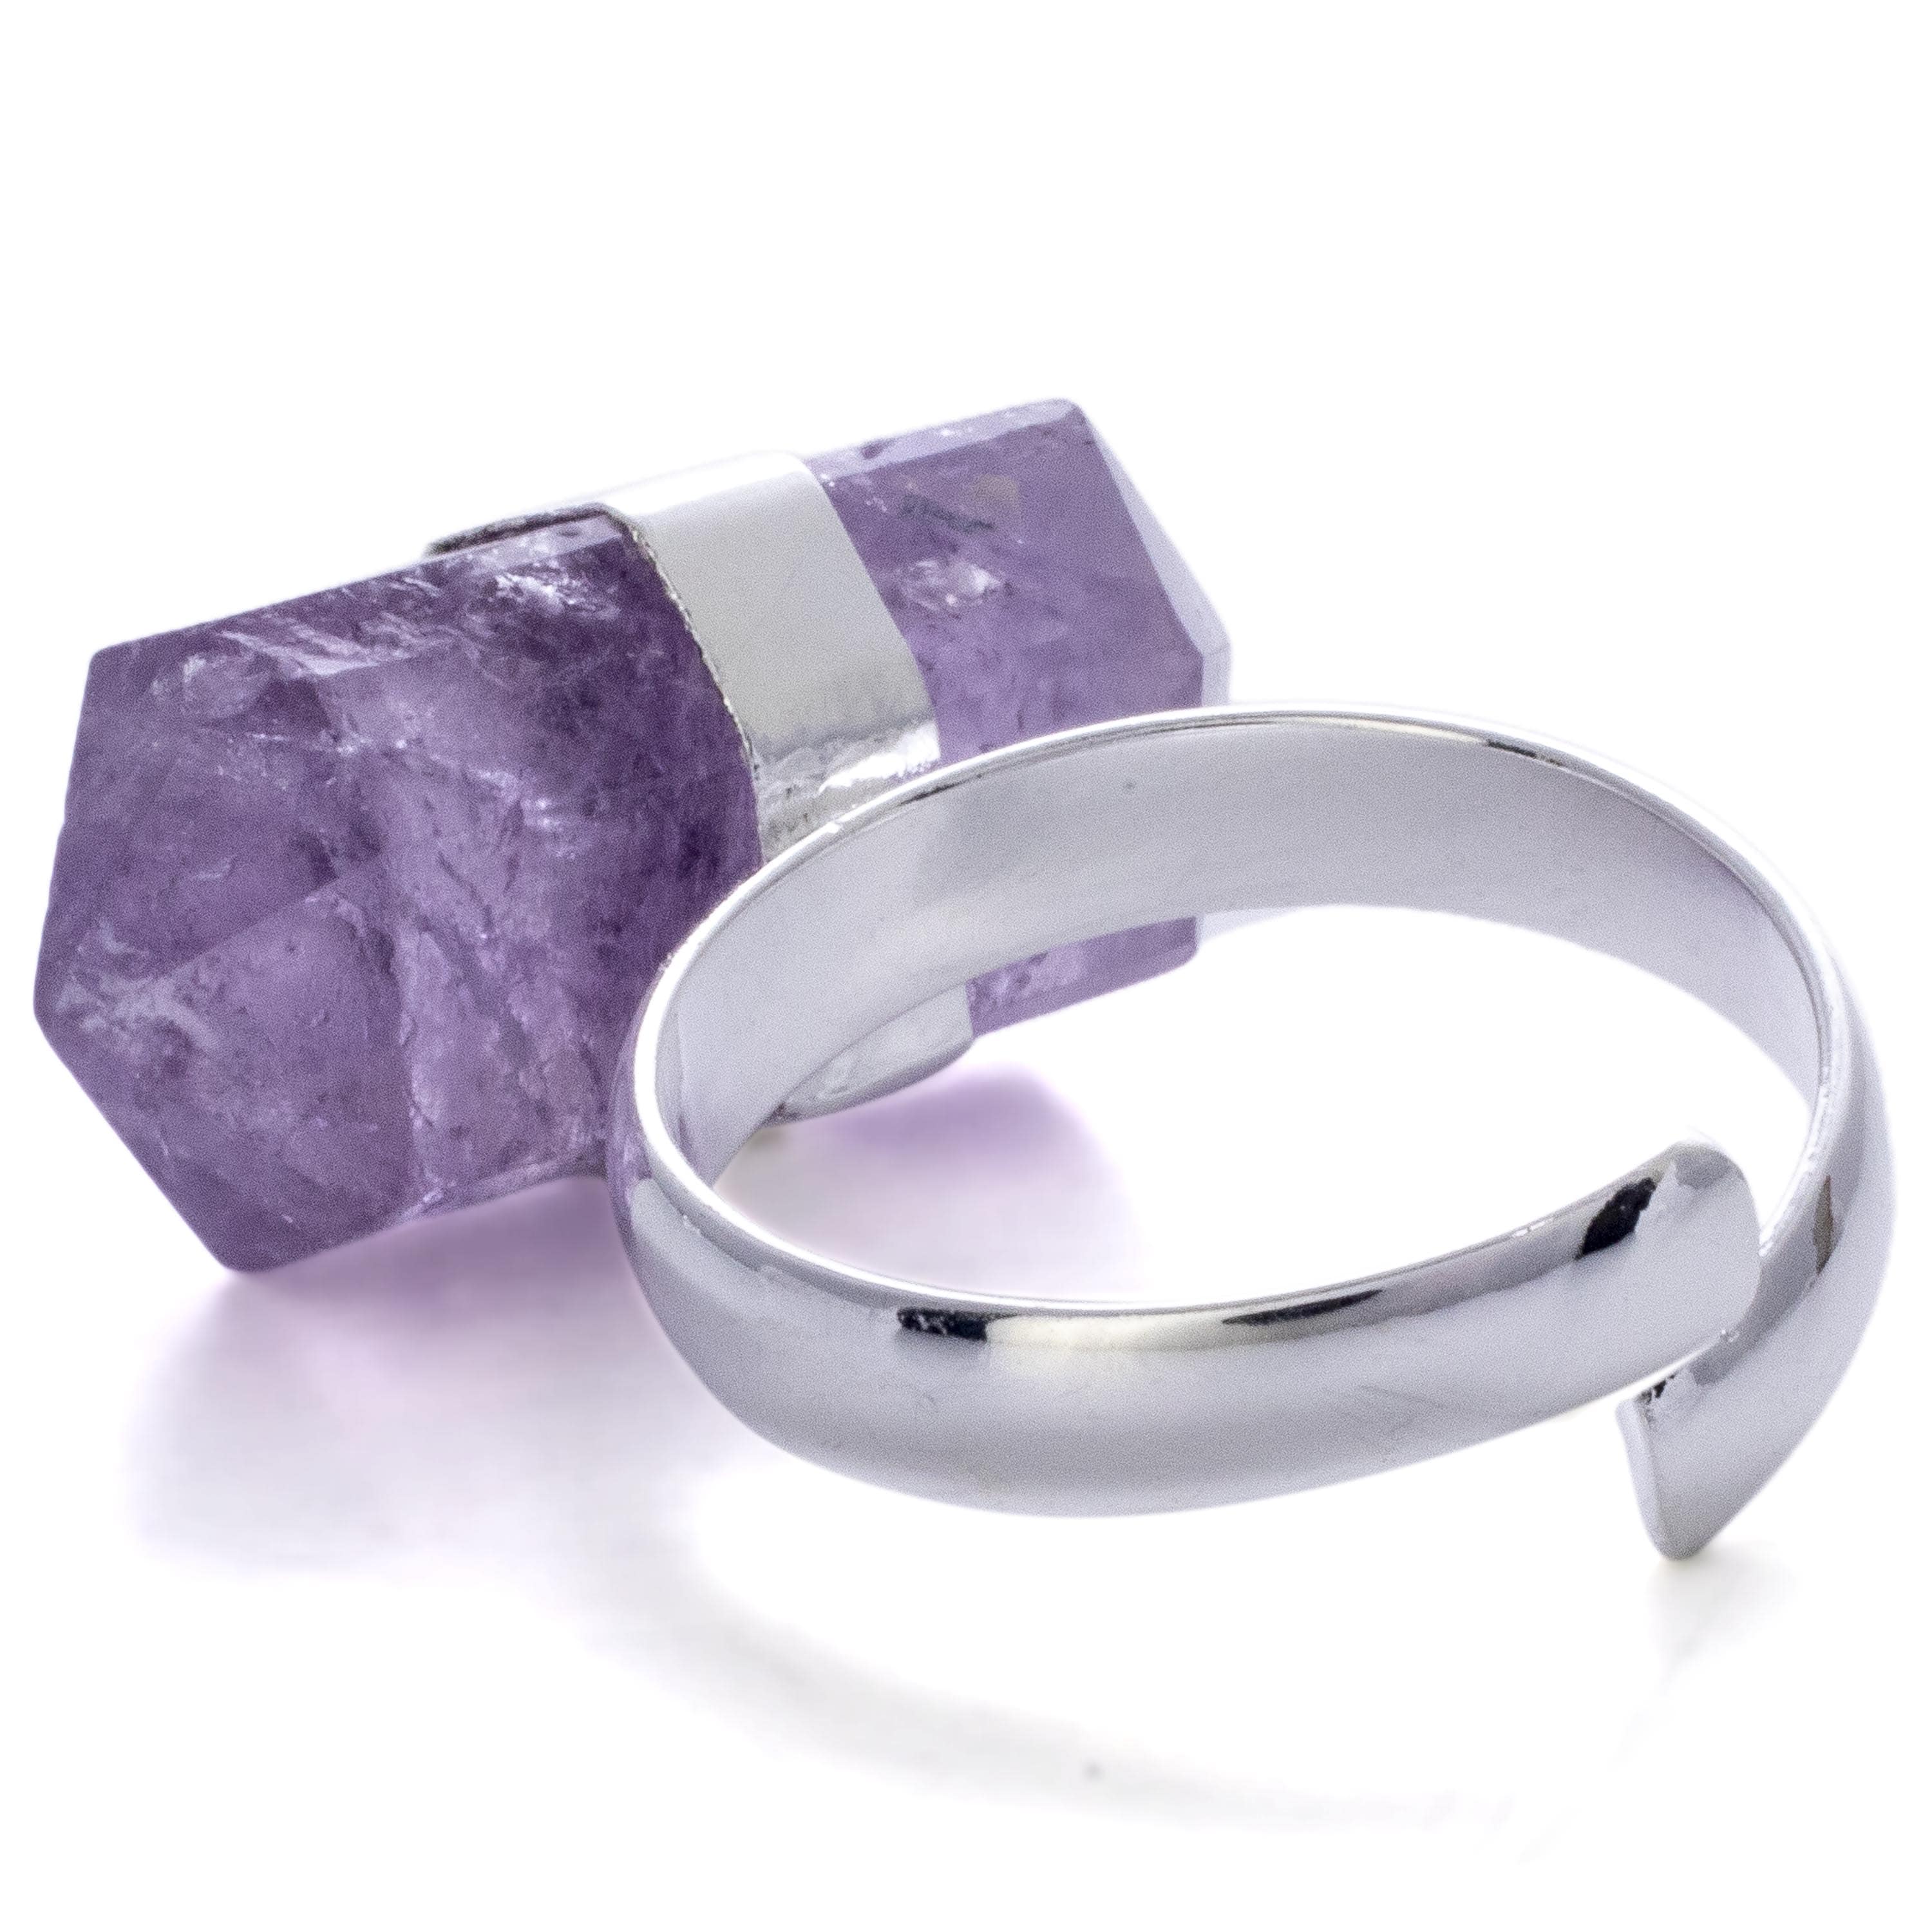 Kalifano Crystal Jewelry Silver Plated Amethyst Adjustable Ring CJR-MJS-AM